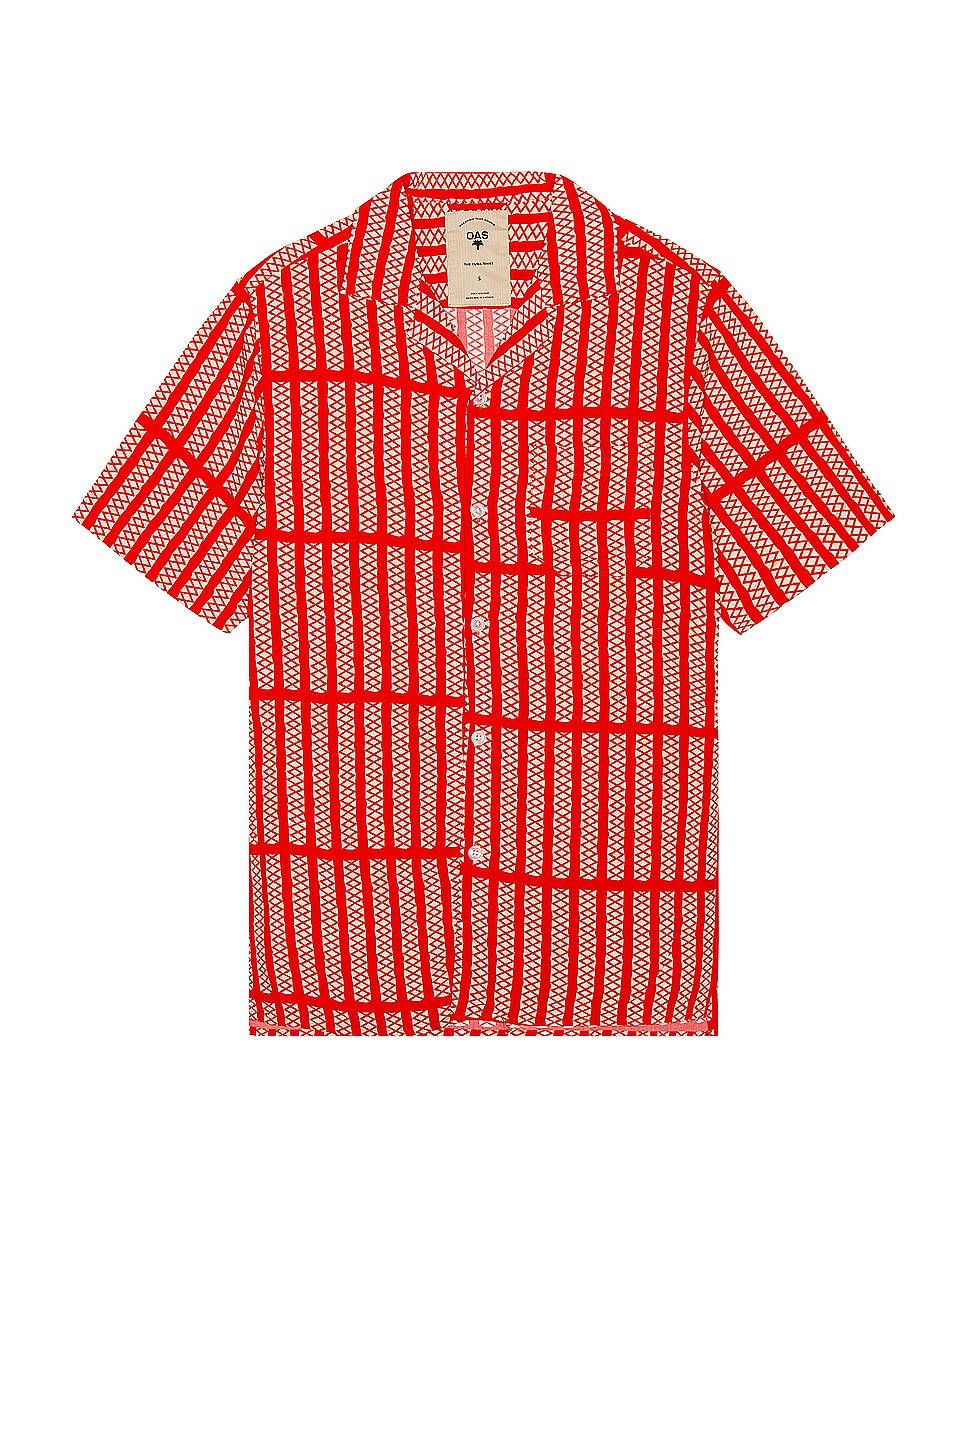 Railway Shirt in Red